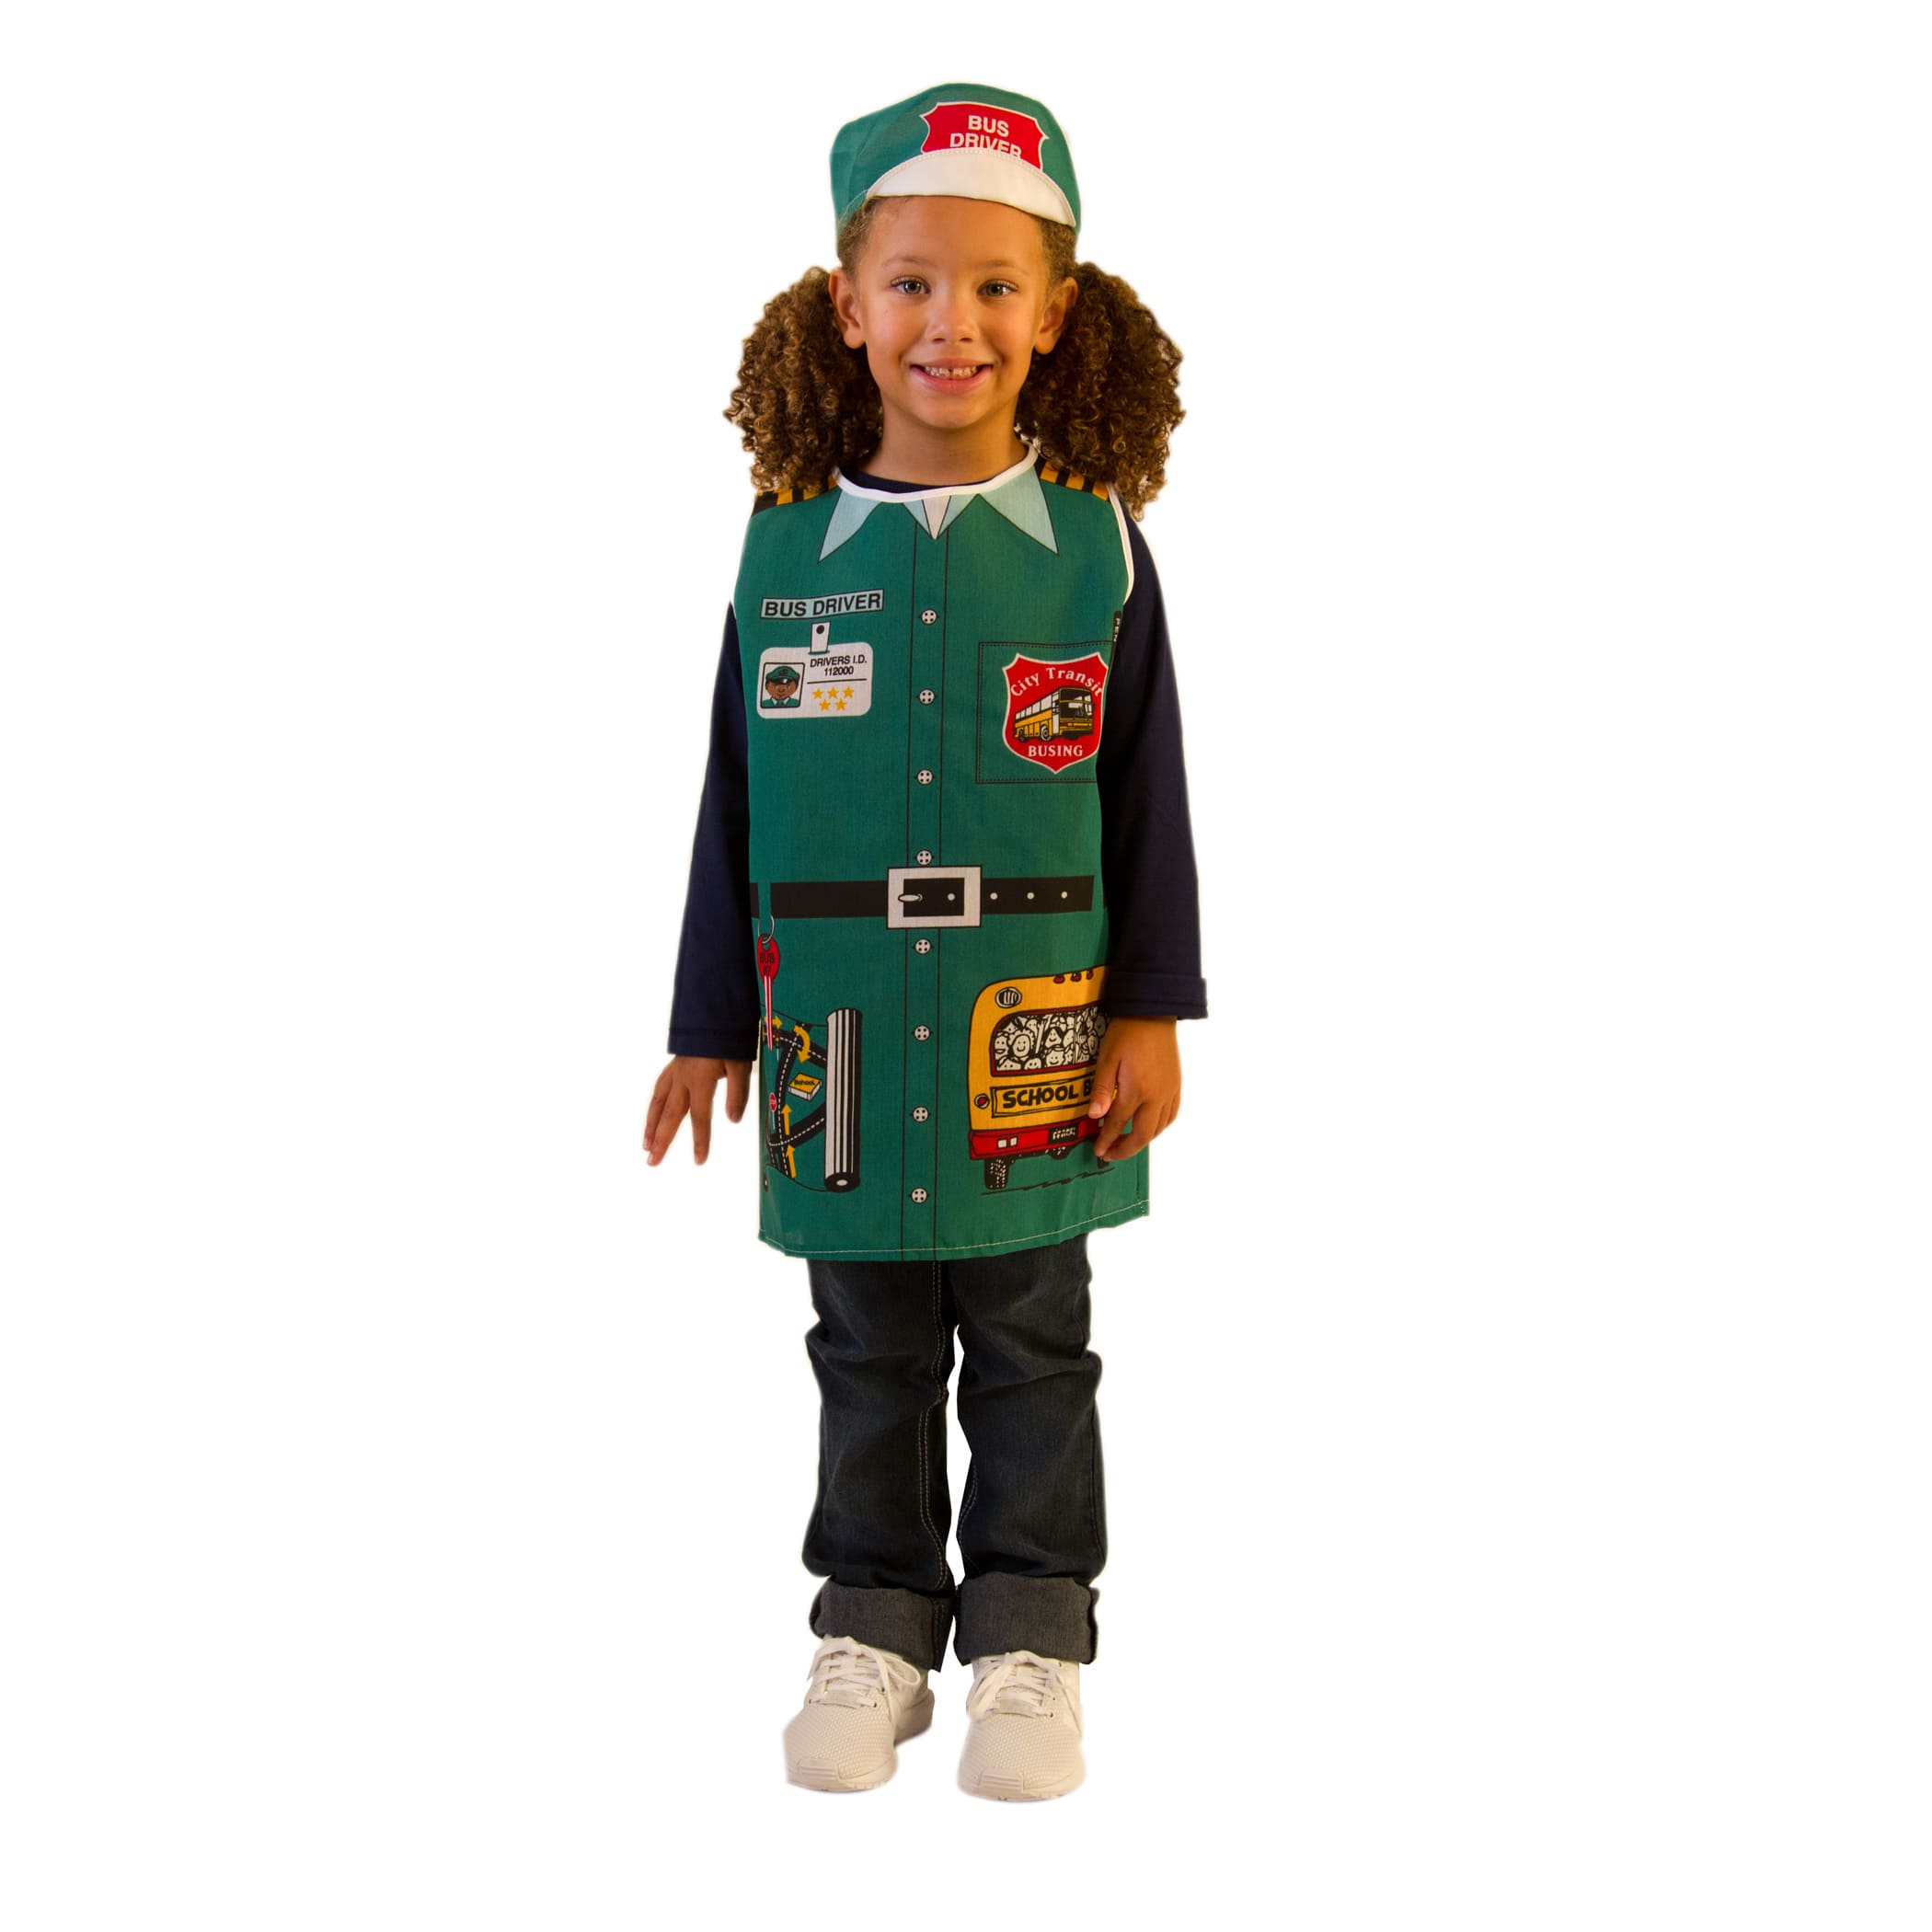 Dexter Educational Play Bus Driver Costume